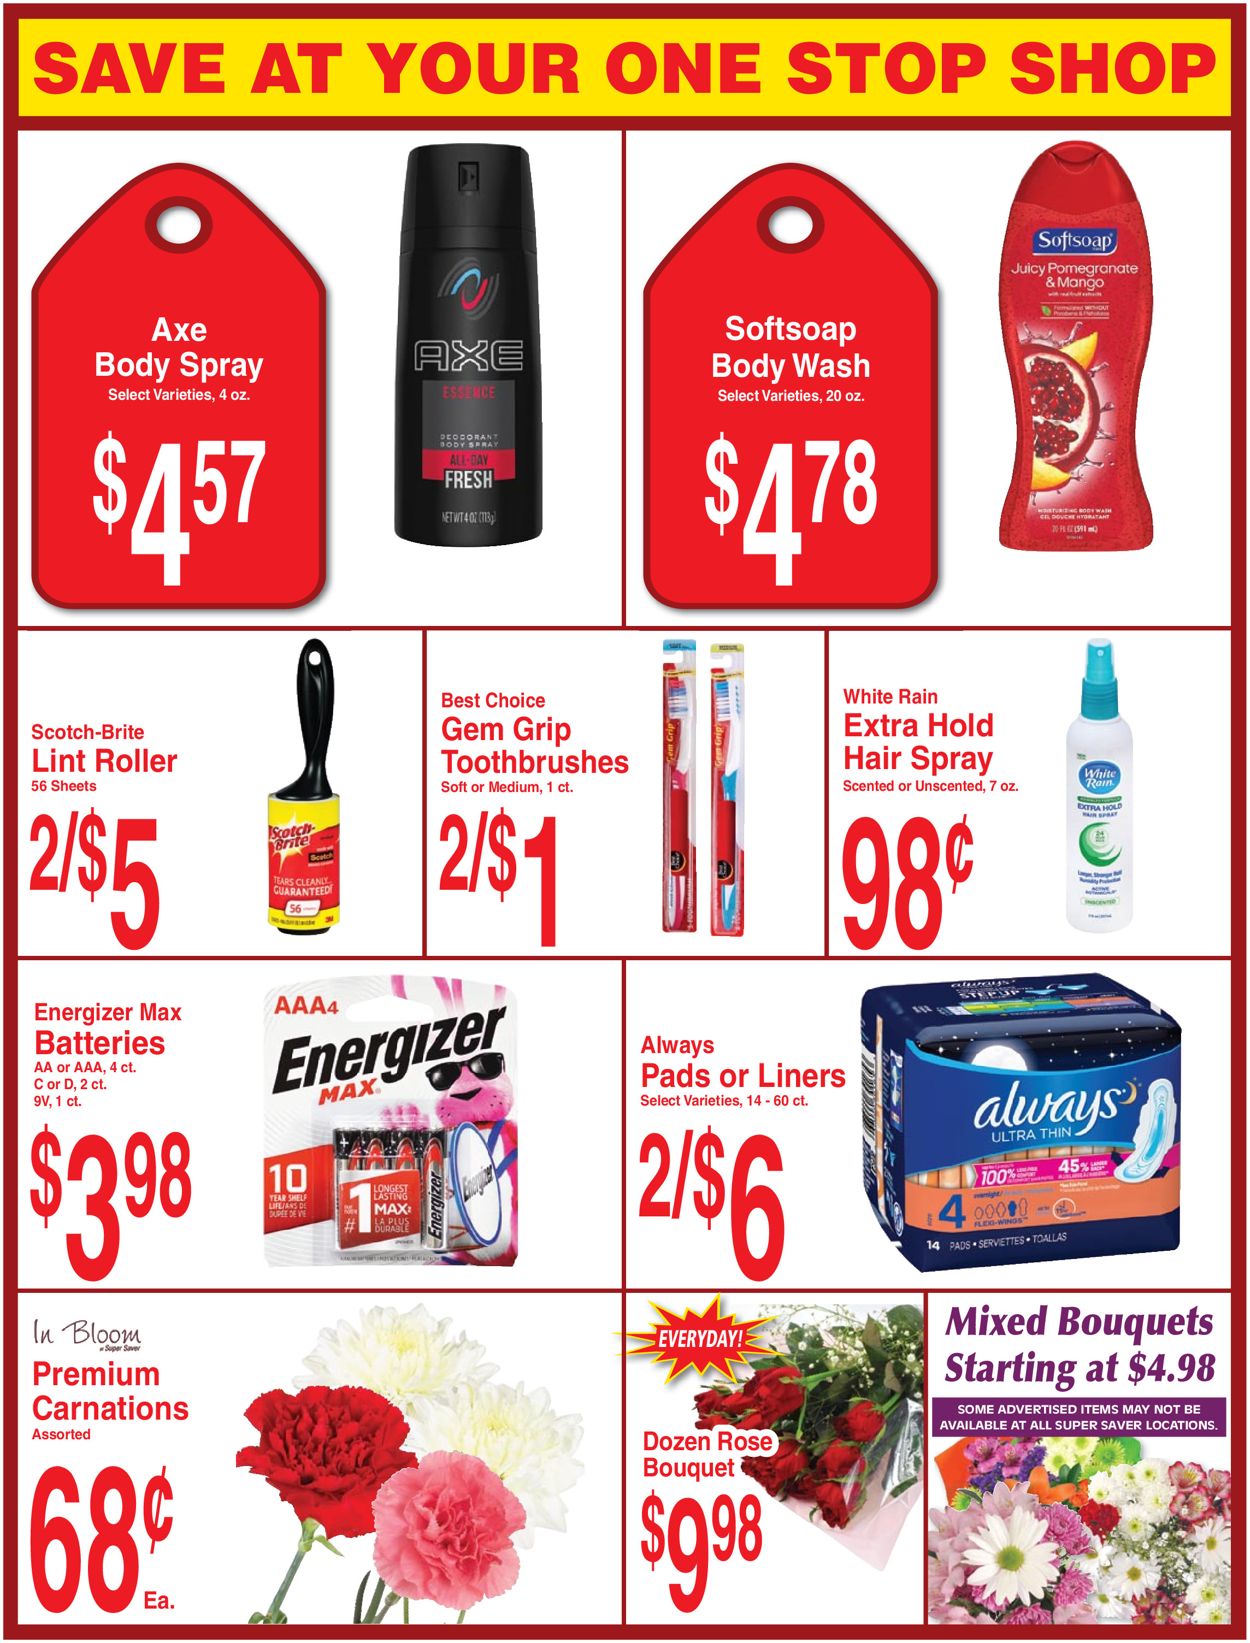 Super Saver Ad from 12/30/2020